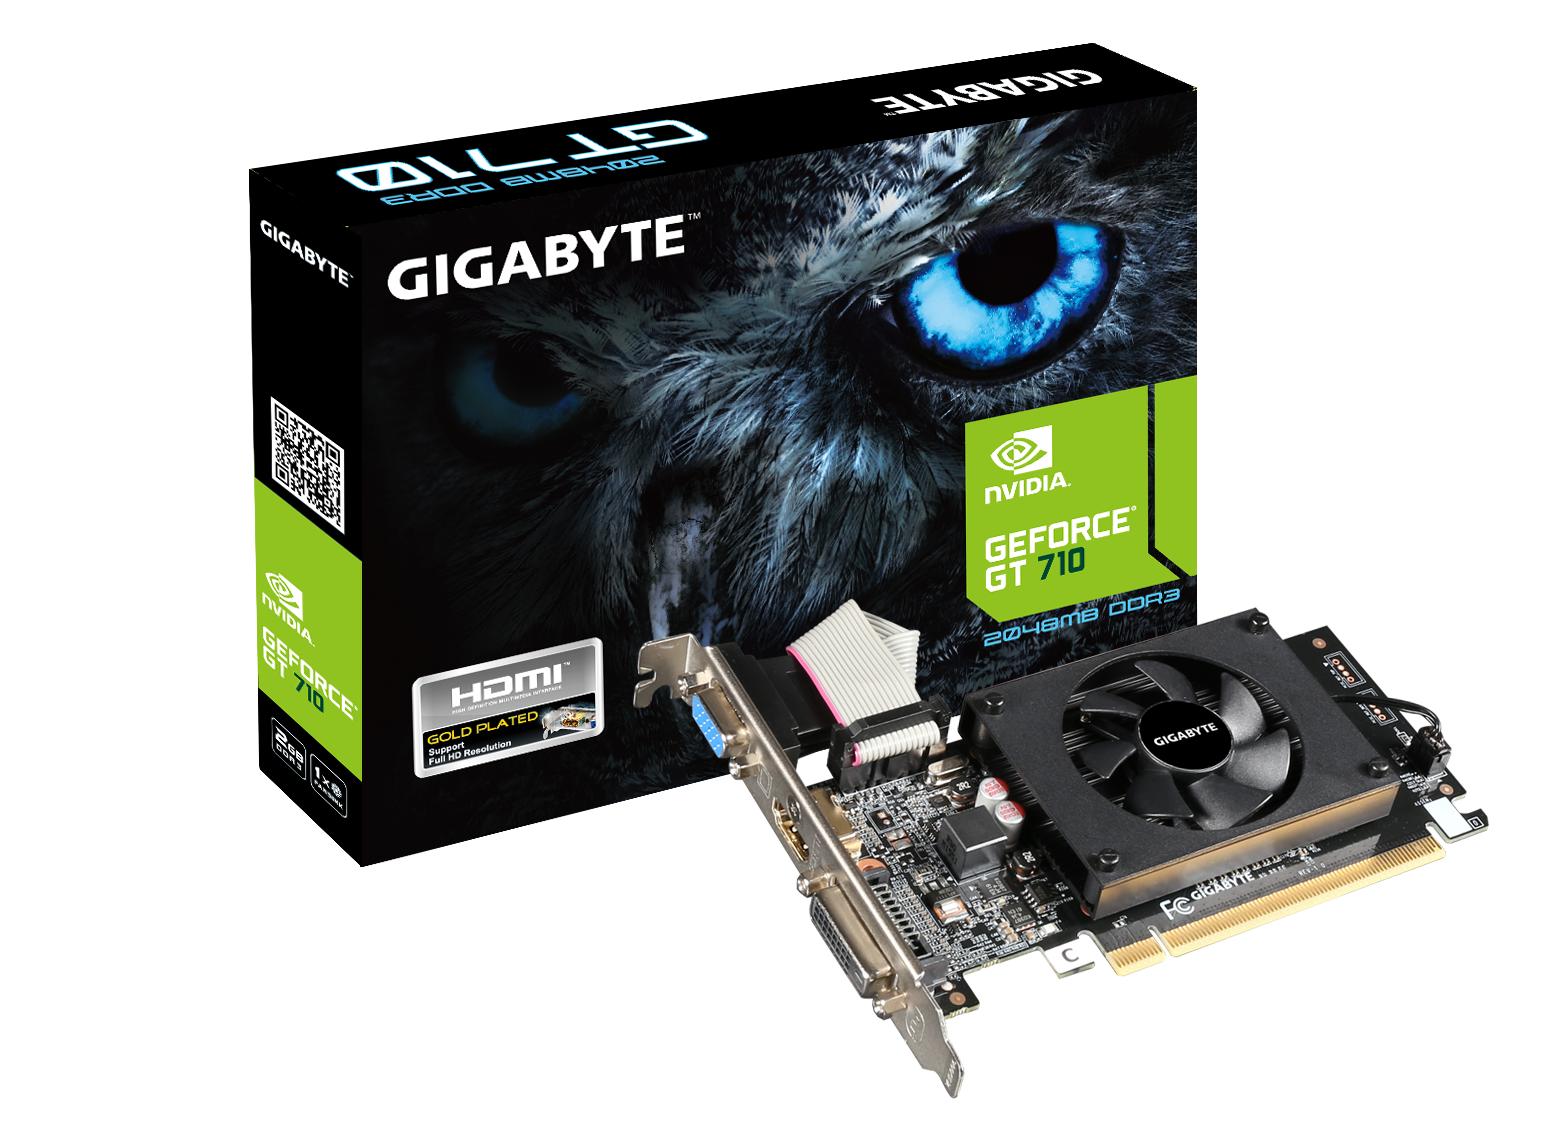 Gigabyte GeForce GT 710 2GB Graphic Cards and Support PCI Express 2.0 X8  Bus Interface. Graphic Cards GV-N710D5-2GL